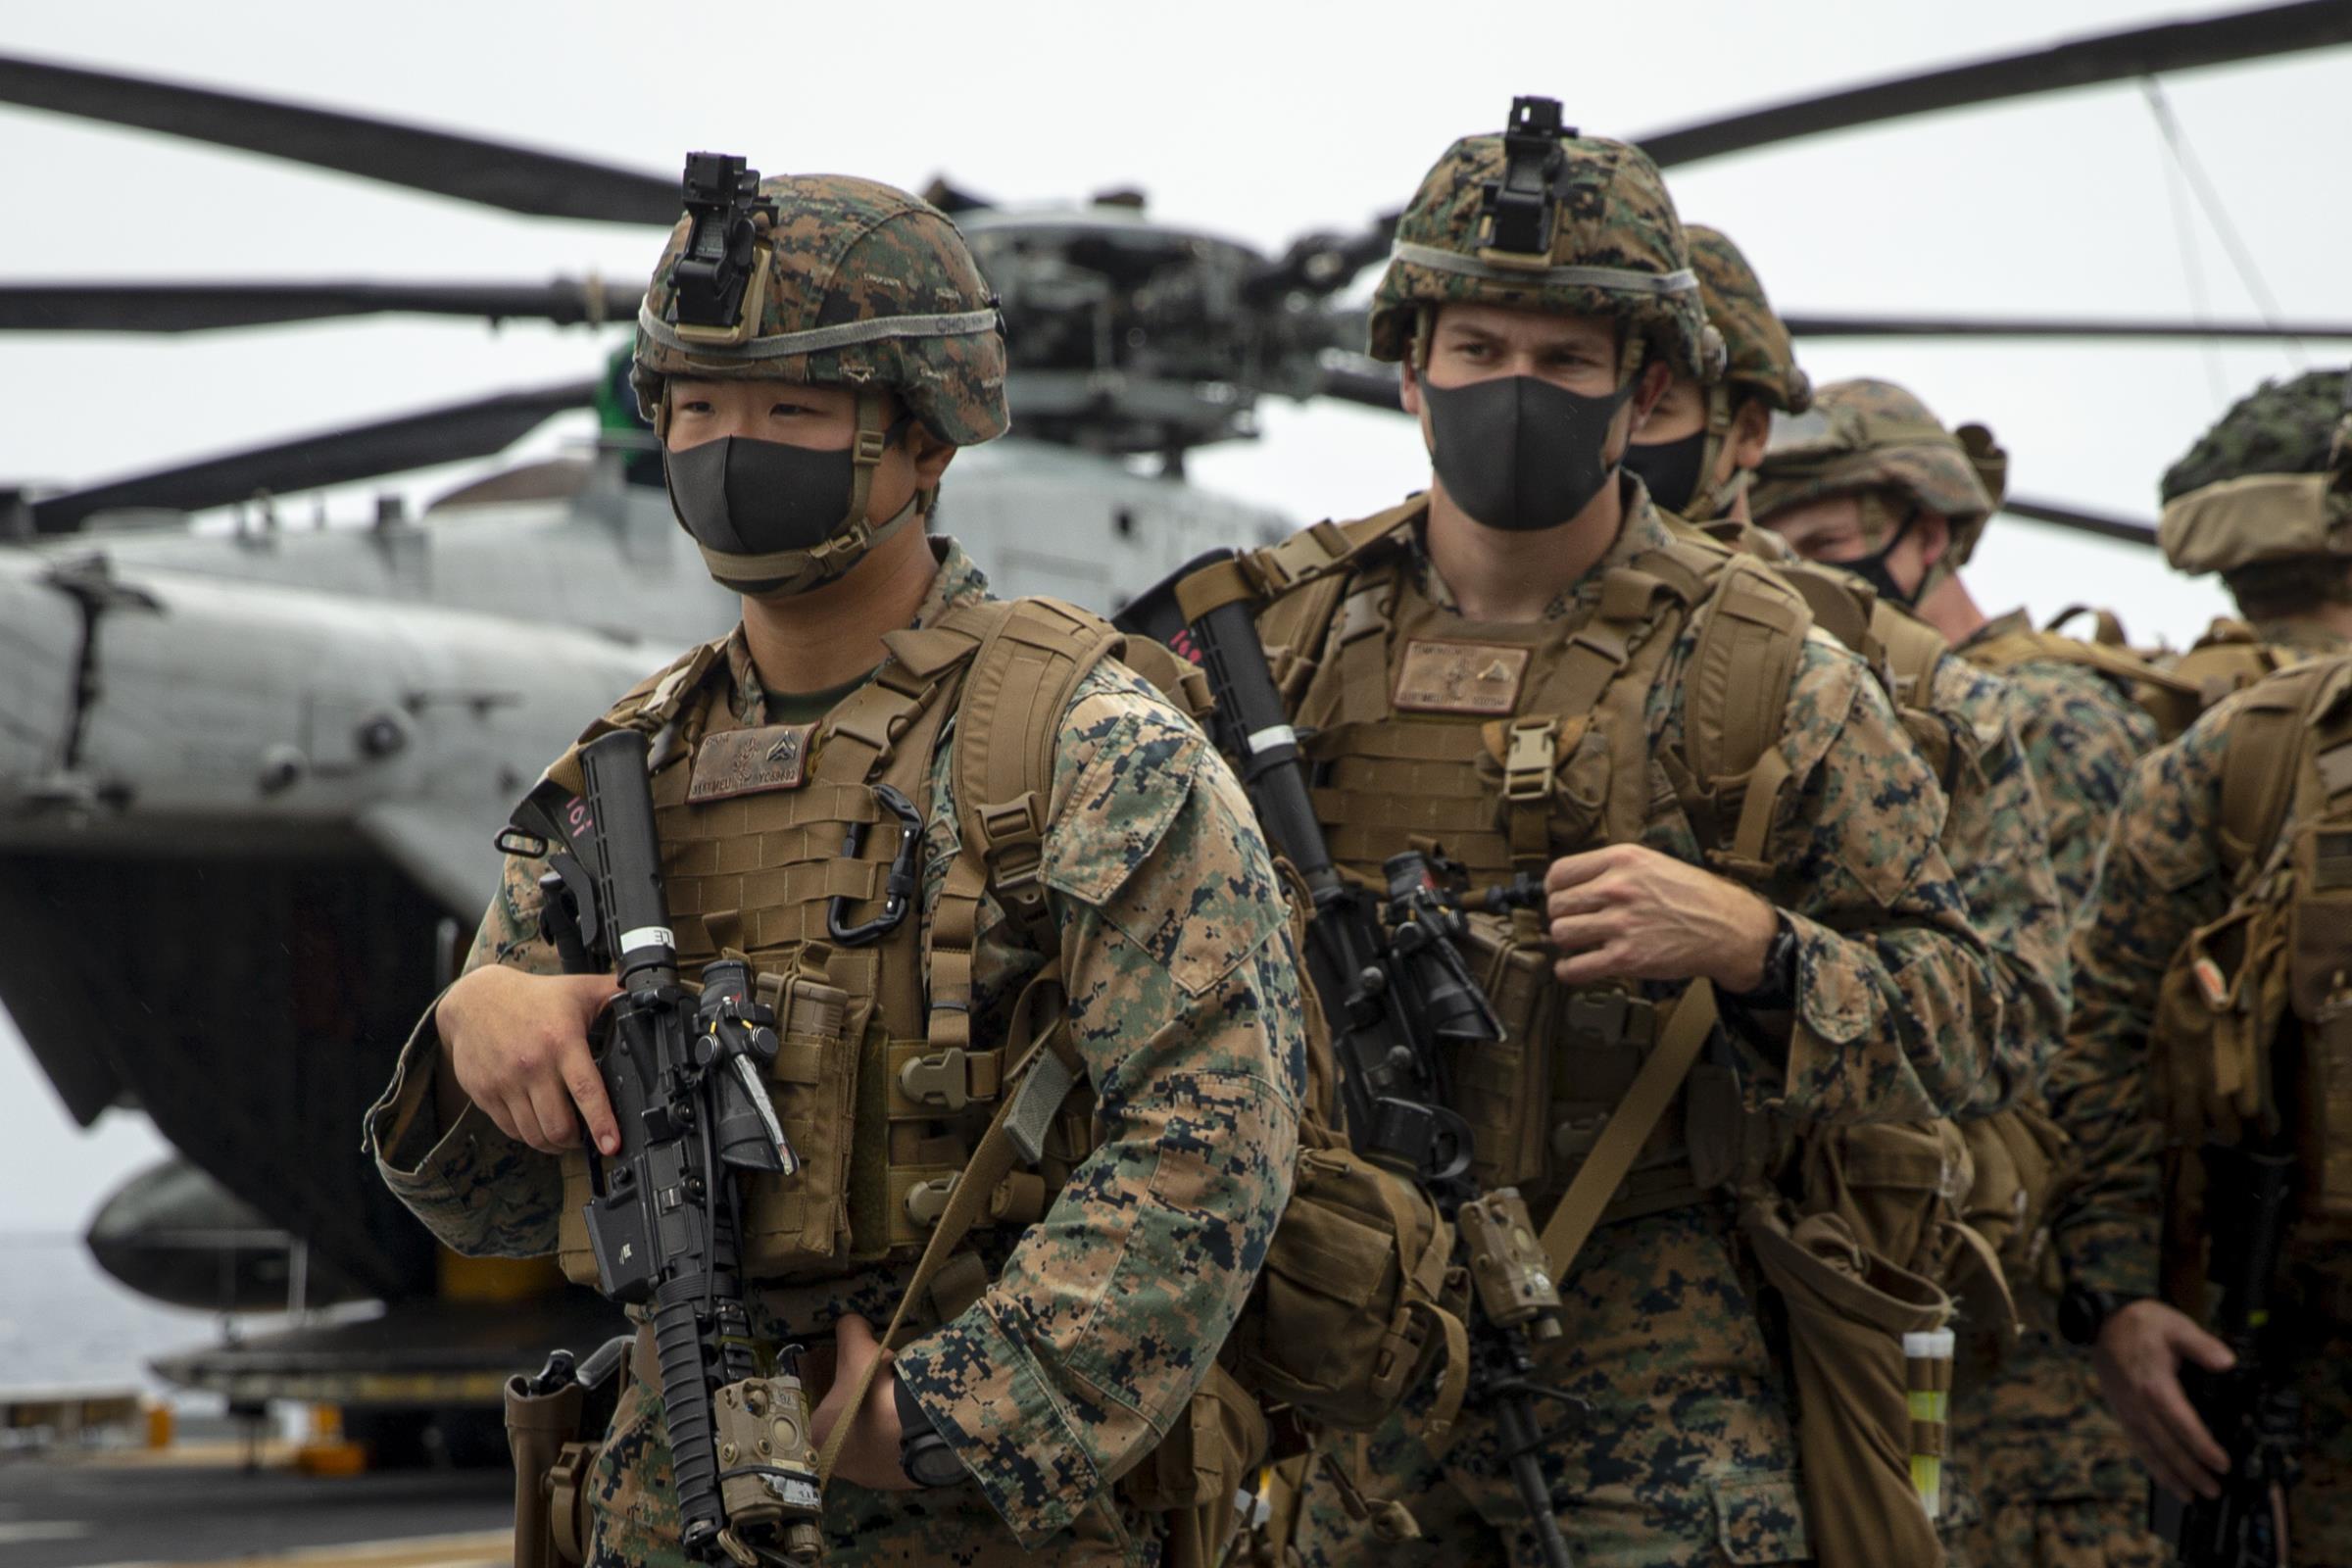 EAST CHINA SEA (Jan. 21, 2021) U.S. Marines with Battalion Landing Team, 3rd Battalion, 4th Marines, 31st Marine Expeditionary Unit (MEU) stand by to conduct training aboard the amphibious assault ship USS America (LHA 6) in the East China Sea, Jan. 21, 2021.